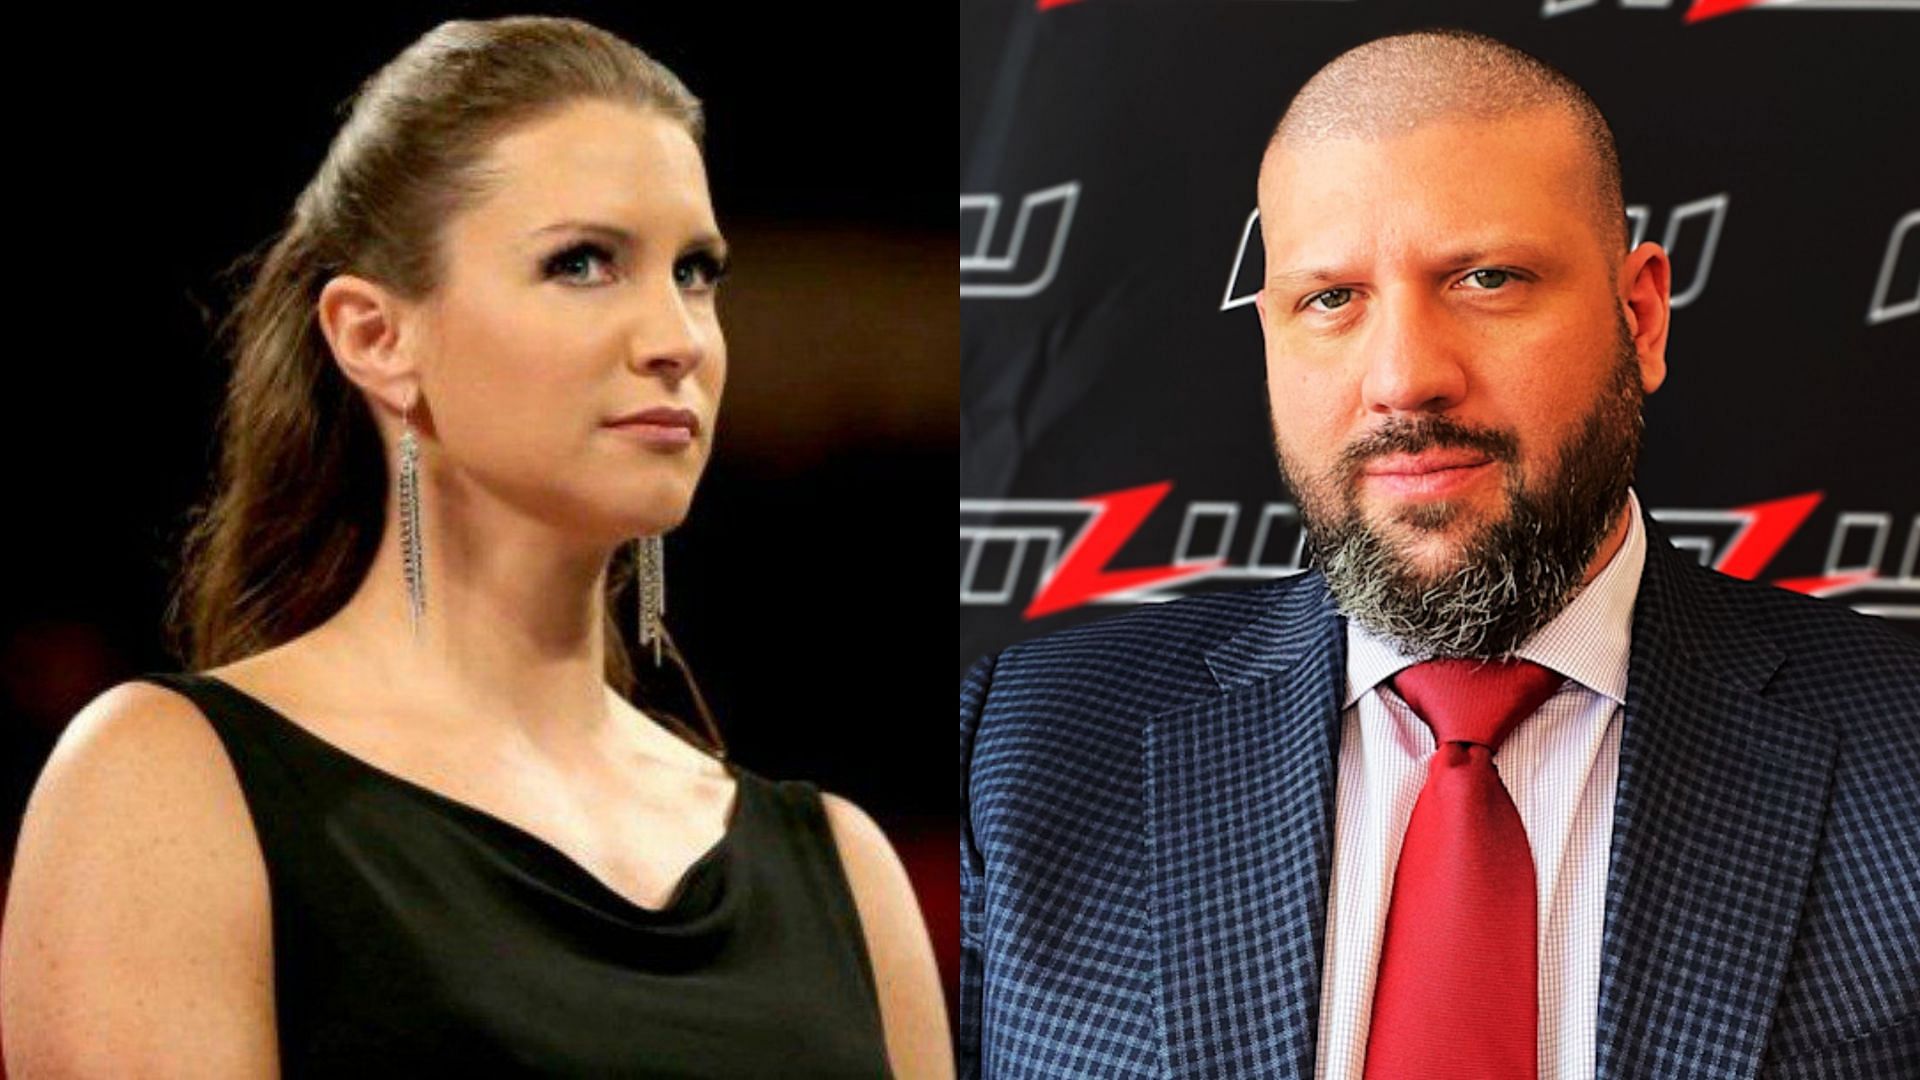 Stephanie McMahon asked Court Bauer to stop telling his wrestling stories